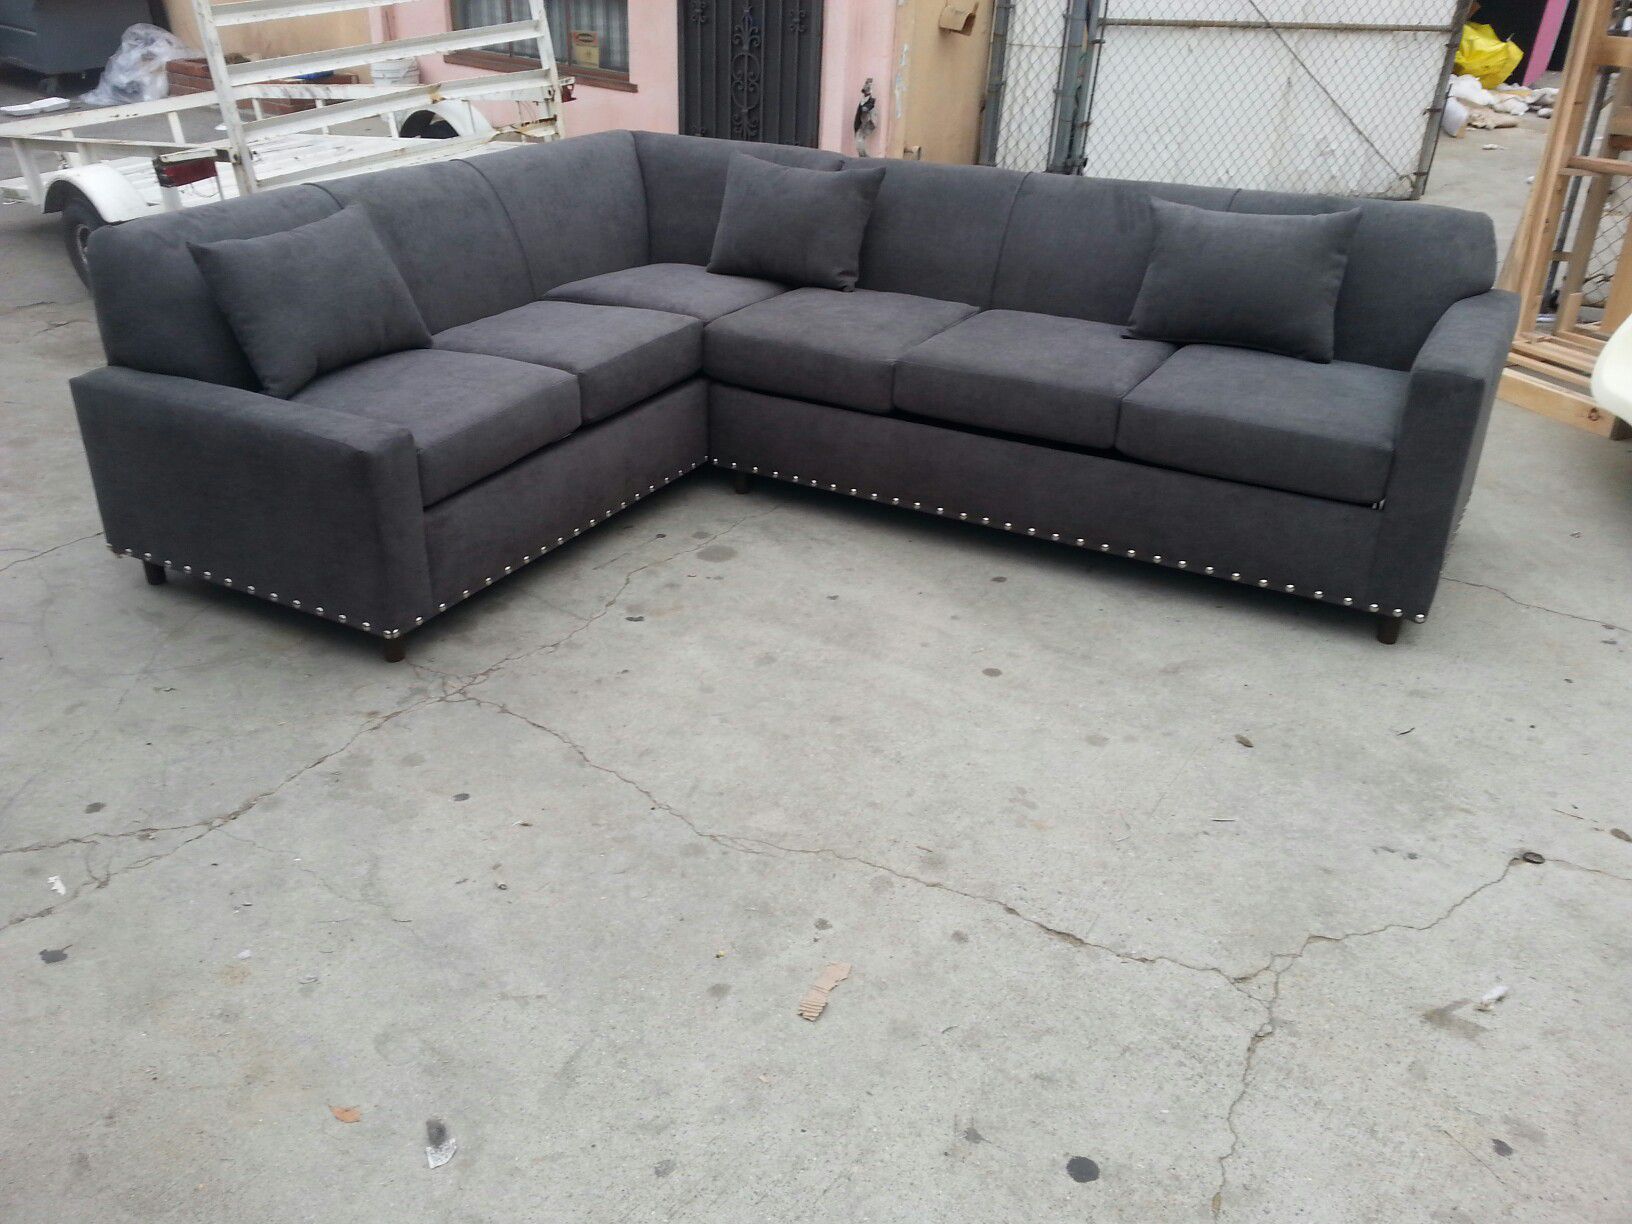 NEW 7X9FT ANNAPOLIS GRANITE FABRIC SECTIONAL COUCHES